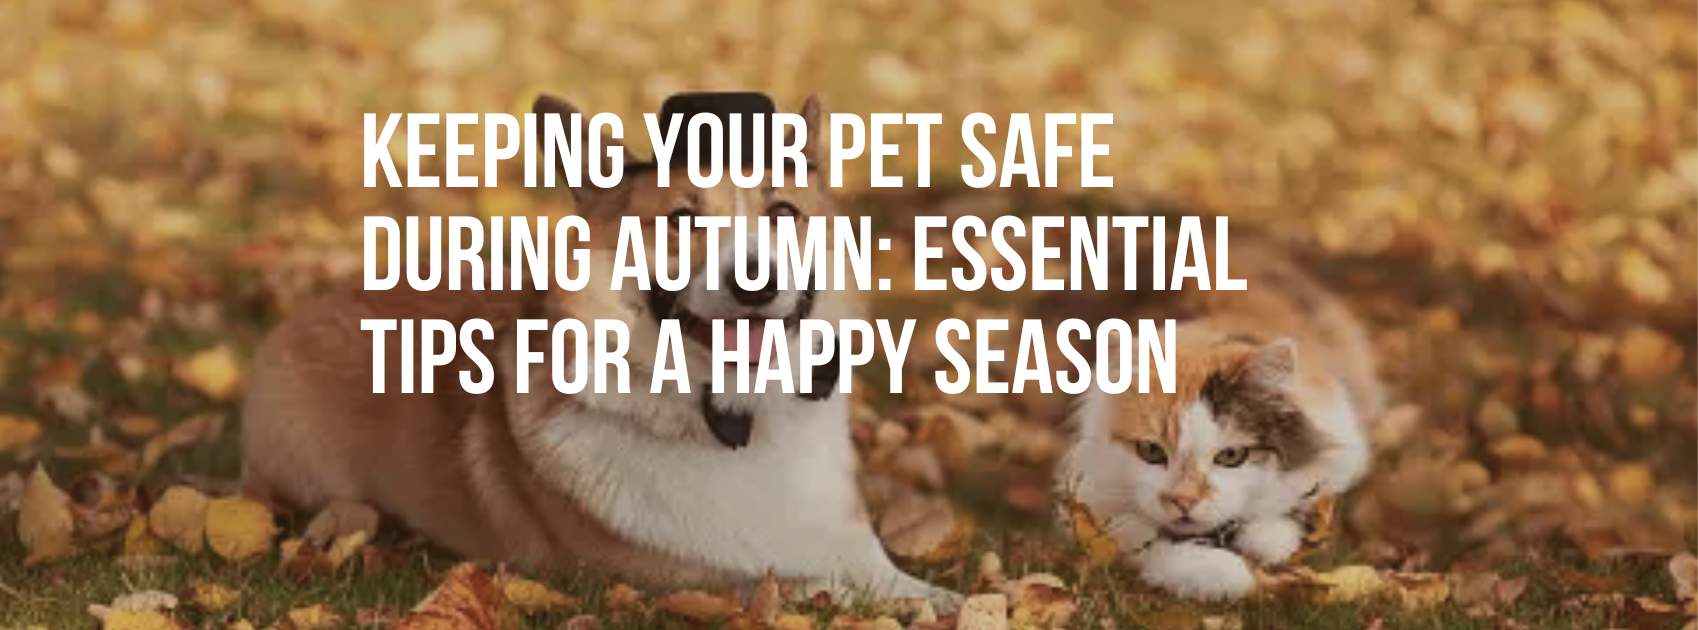 Keeping Your Pet Safe During Autumn: Essential Tips for a Happy Season